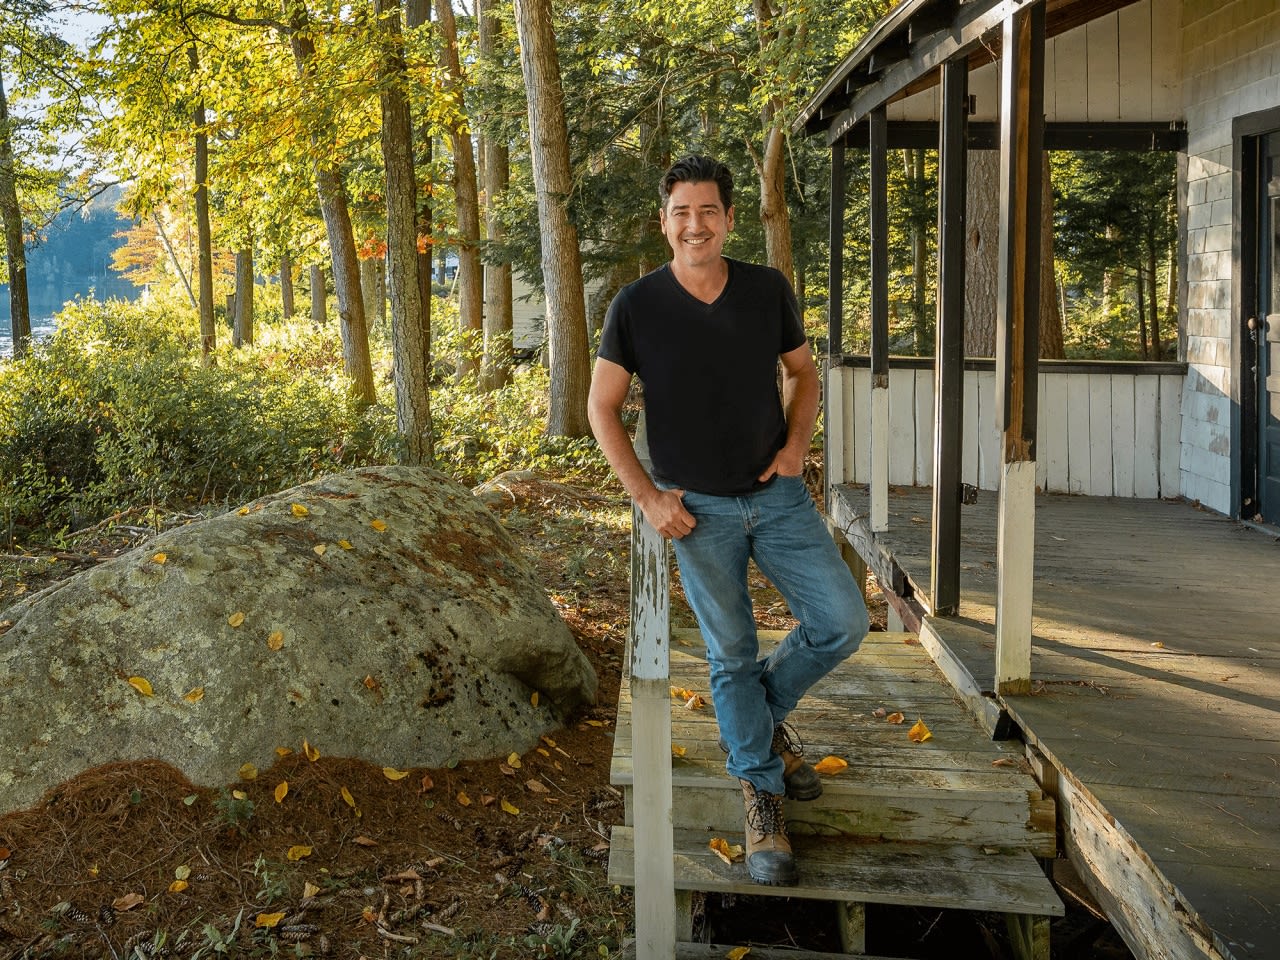 How to watch new episode of HGTV’s ‘Farmhouse Fixer’ with New Kids on the Block star Jonathan Knight